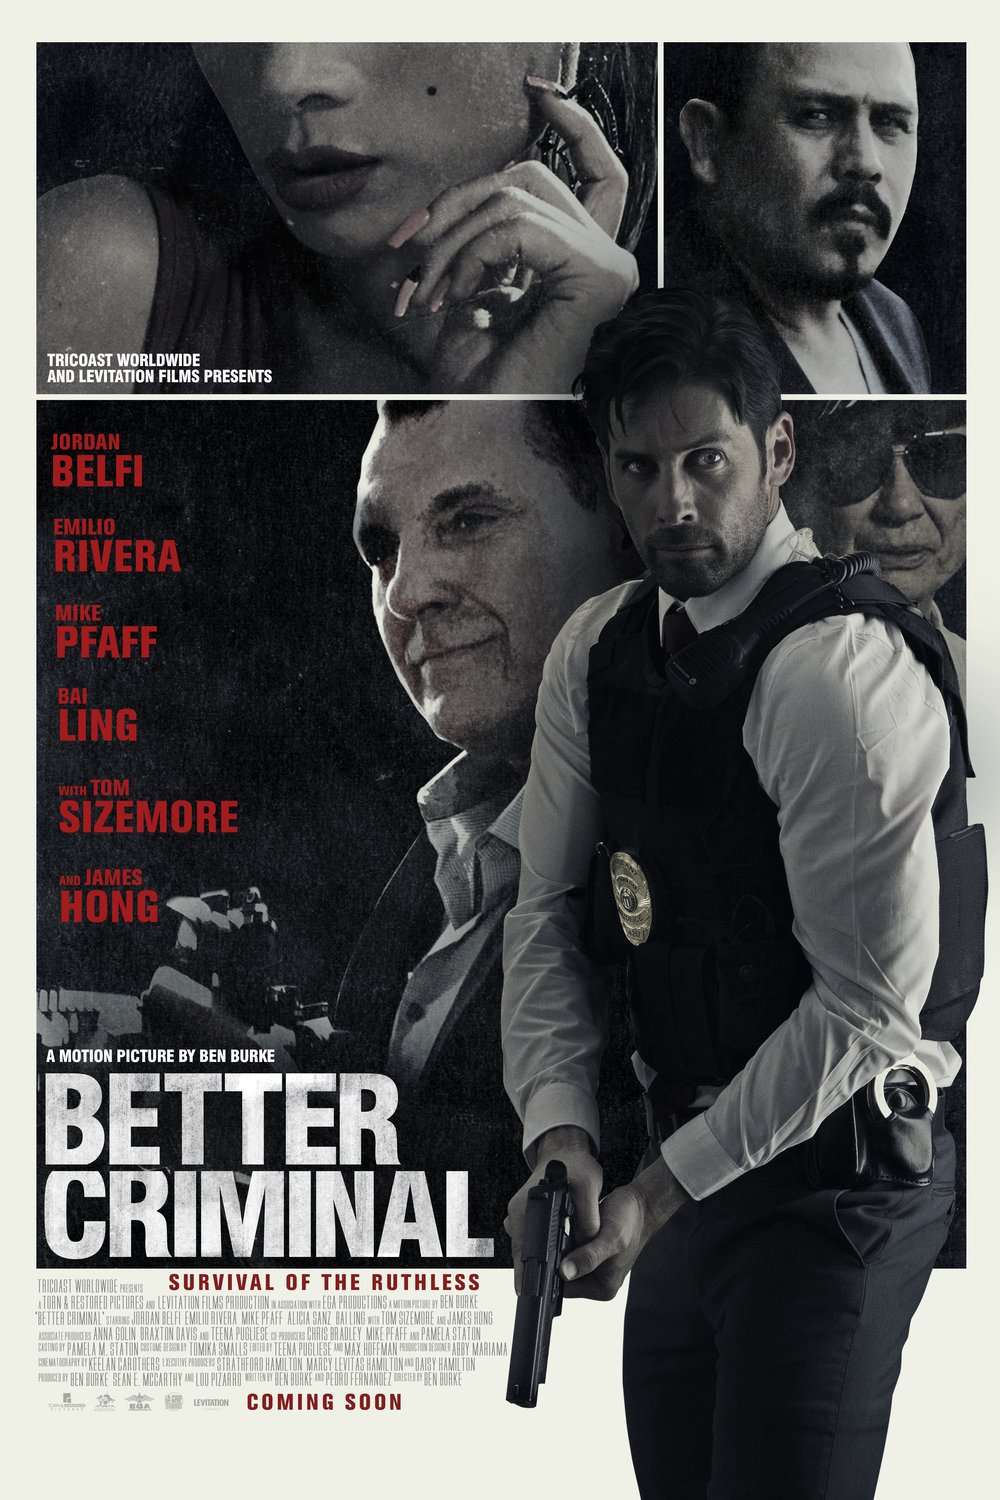 Poster of the movie Better Criminal